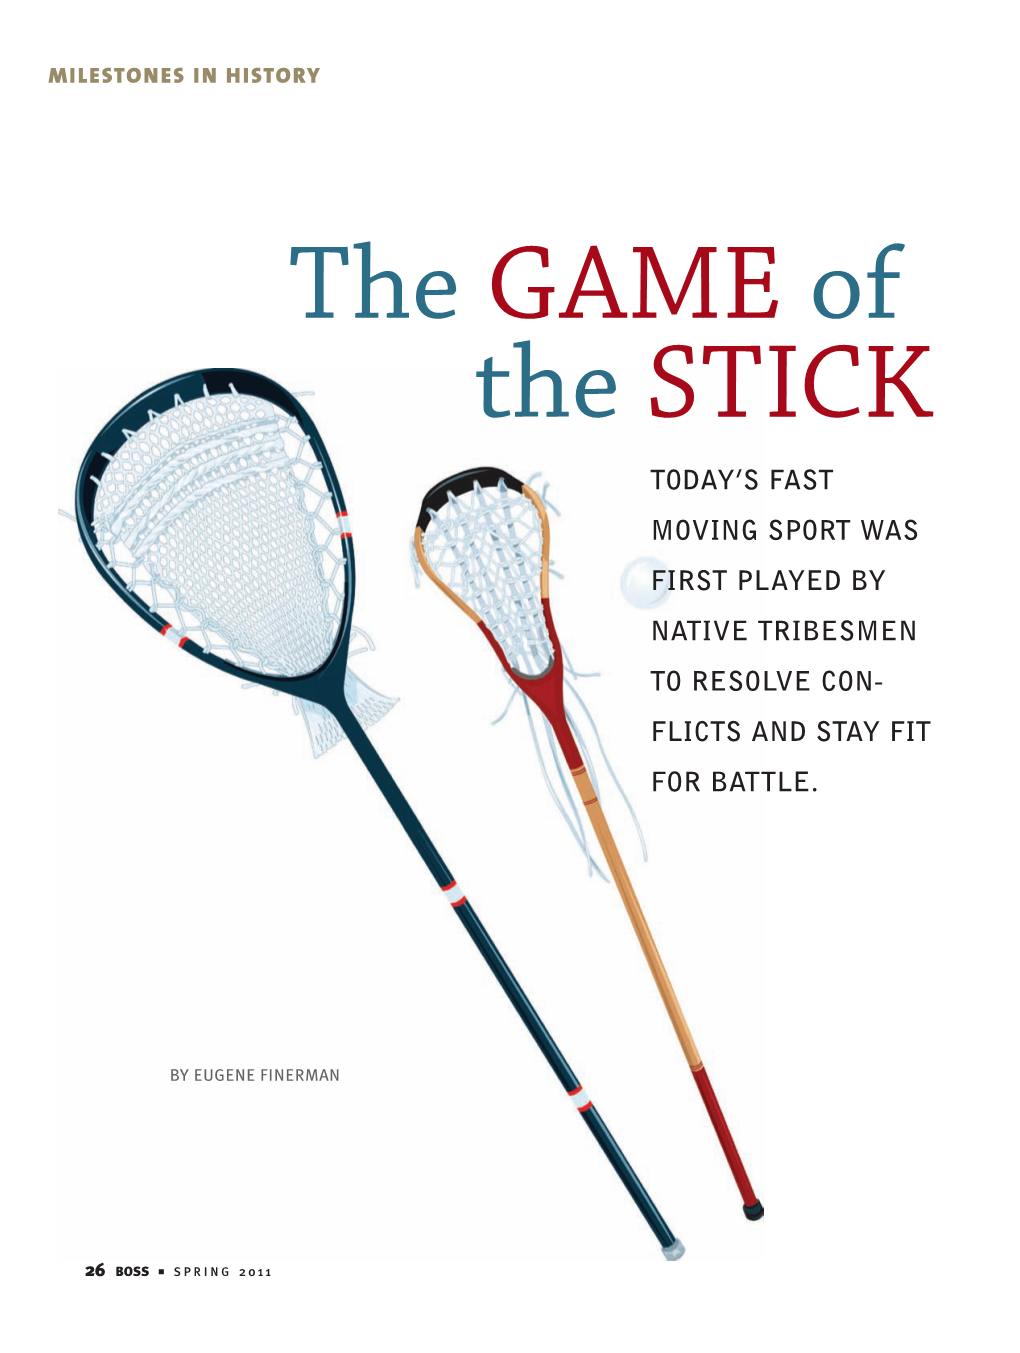 The GAME of the STICK TODAY’S FAST MOVING SPORT WAS FIRST PLAYED by NATIVE TRIBESMEN to RESOLVE CON - FLICTS and STAY FIT for BATTLE